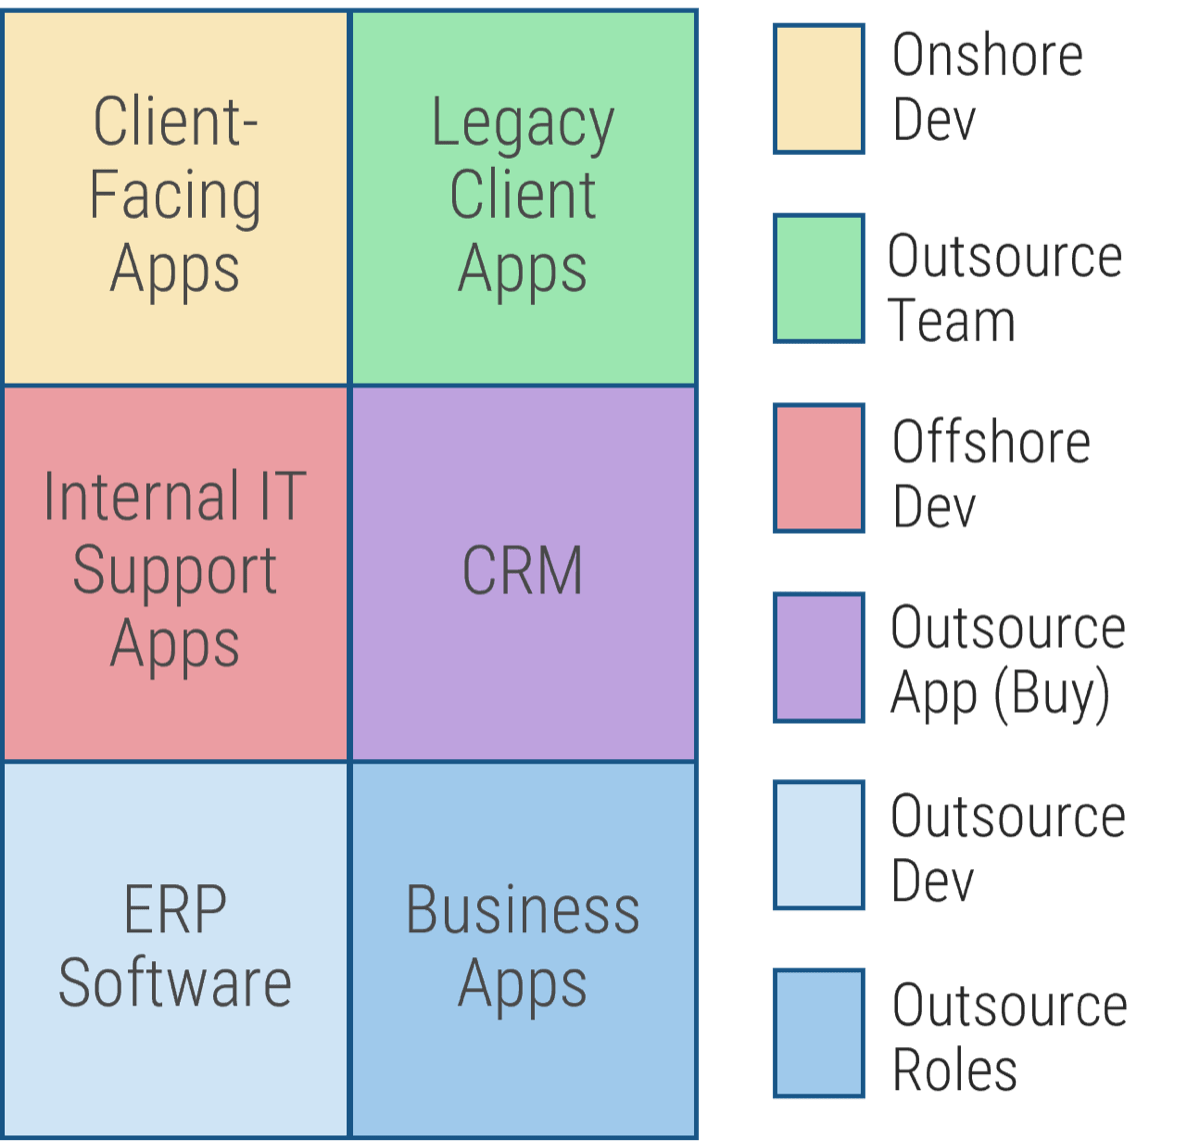 Example sourcing strategy with initiatives like 'Client-Facing Apps' and 'ERP Software' assigned to 'Onshore Dev', 'Outsource Team', 'Offshore Dev', 'Outsource App (Buy)', 'Outsource Dev', or 'Outsource Roles'.